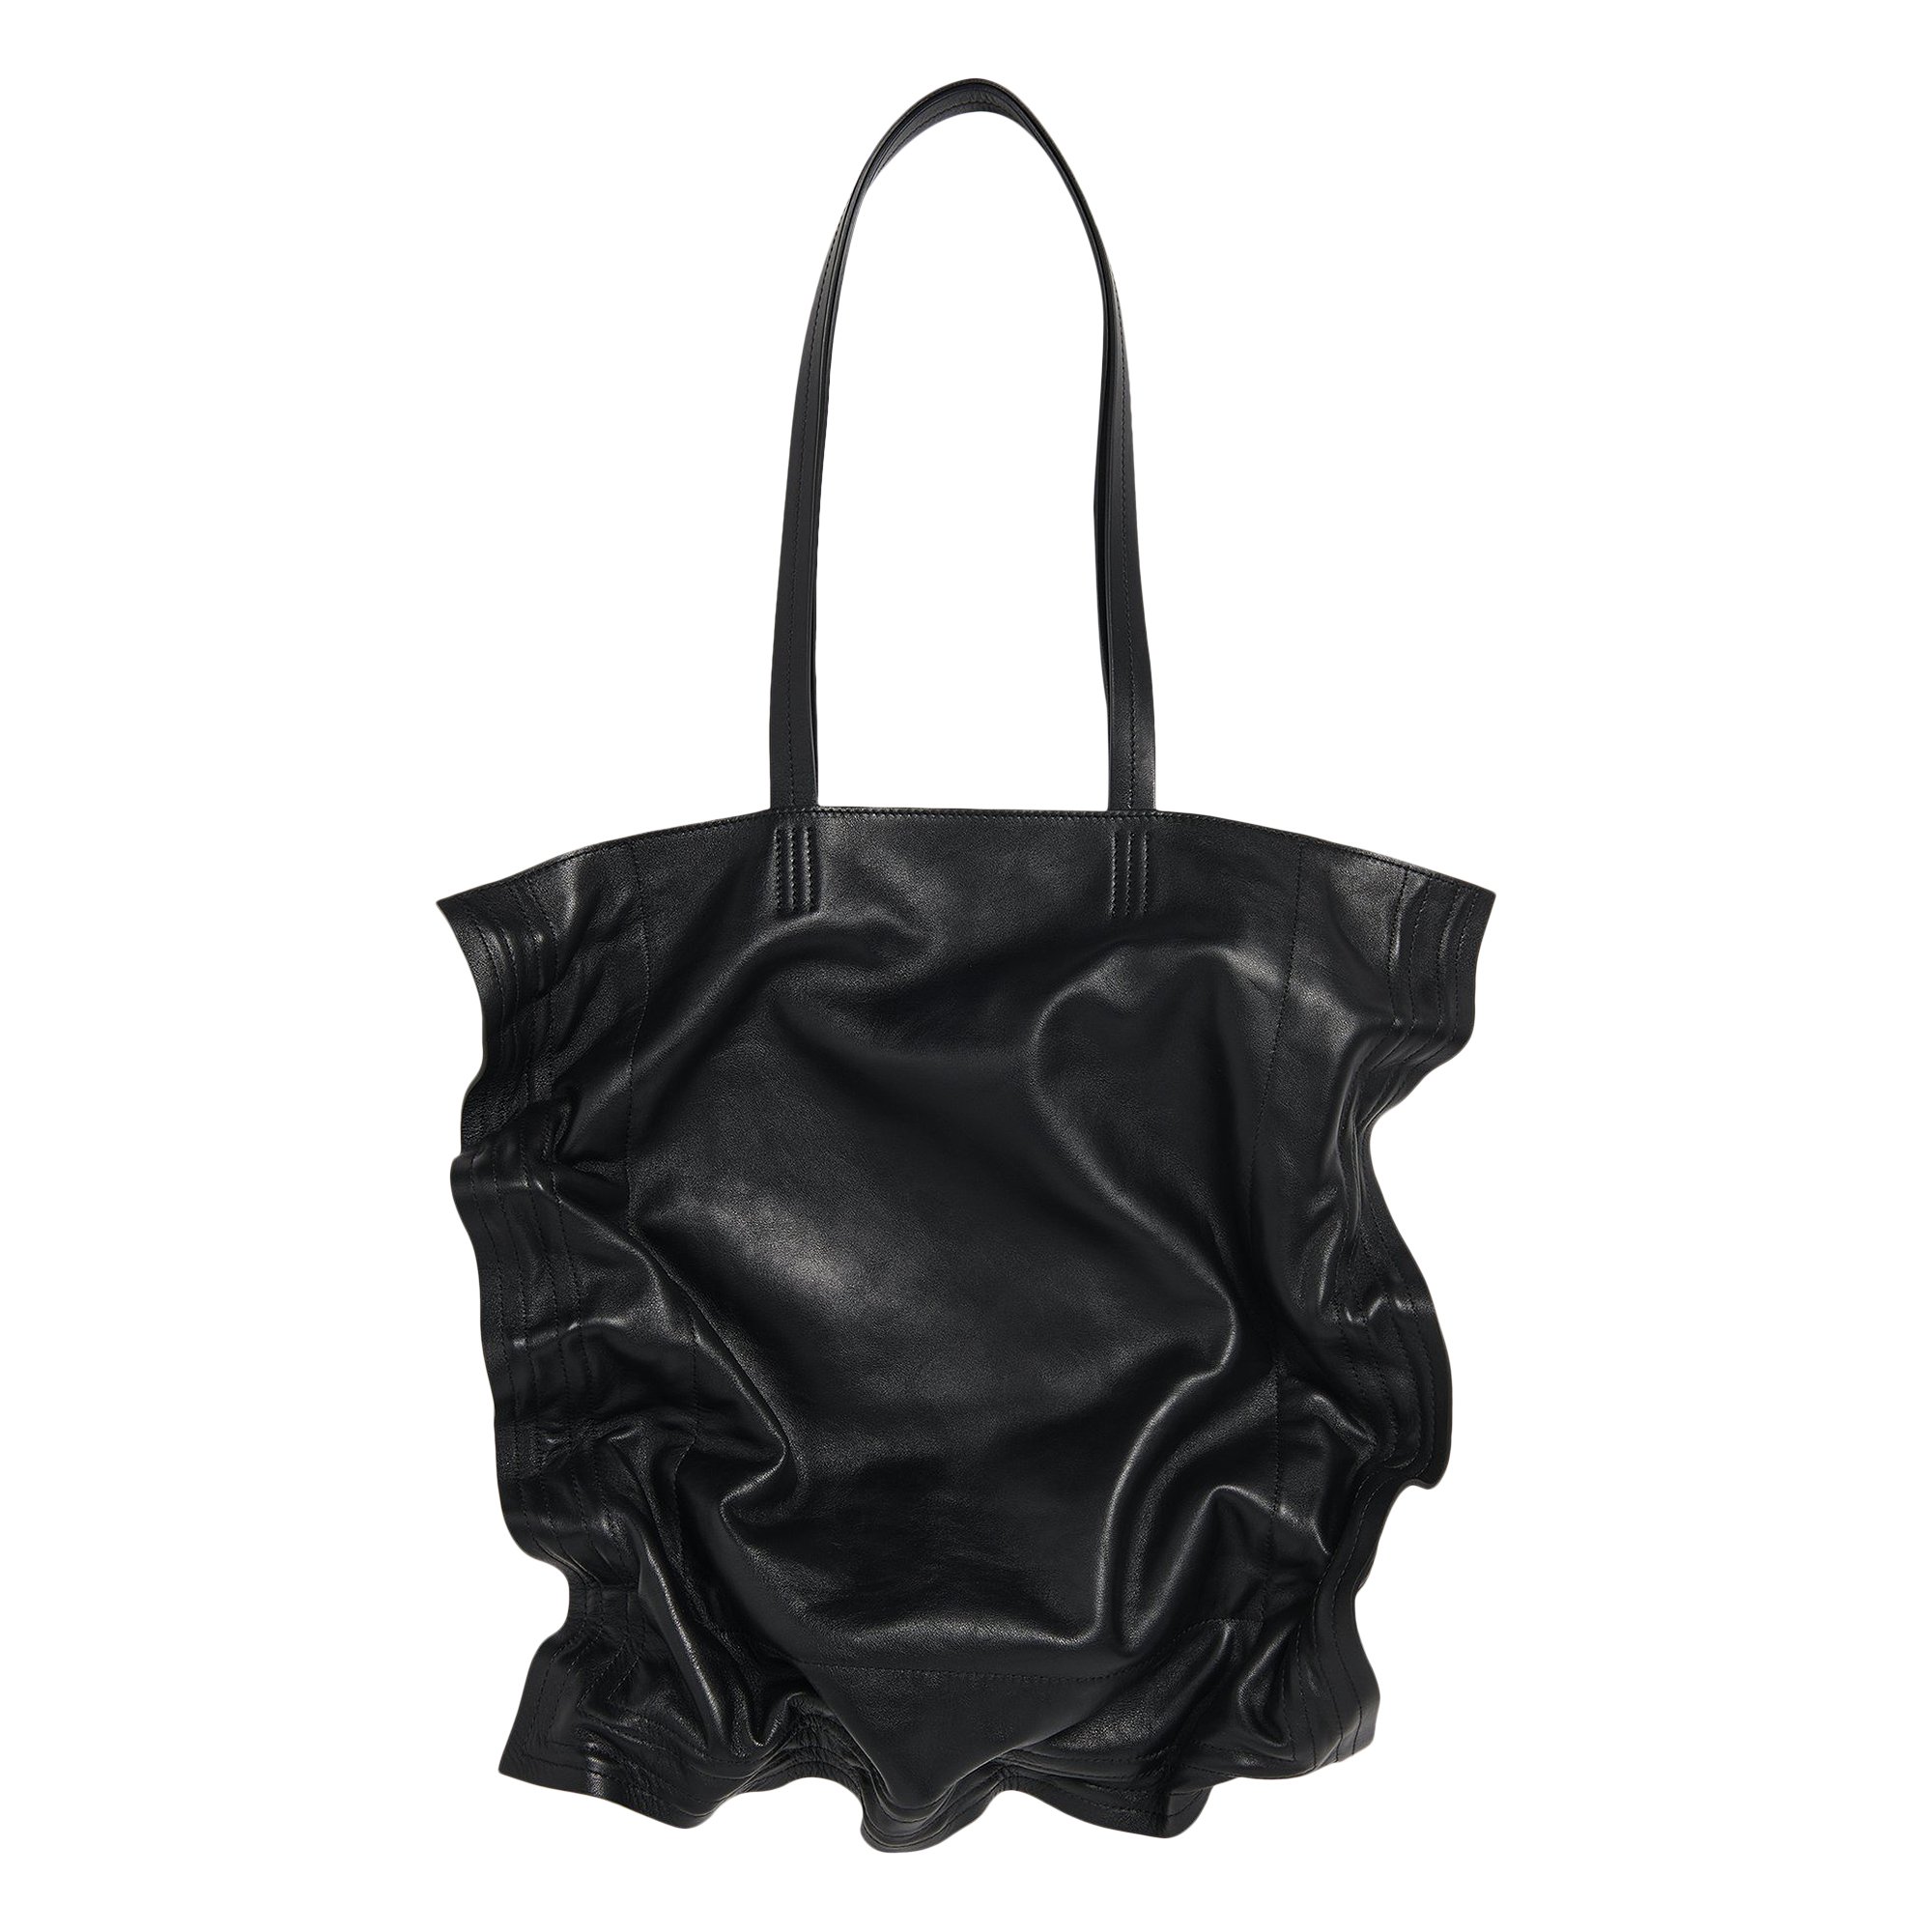 Buy Y/Project Wire Tote Bag 'Black' - 2745956928258 | GOAT